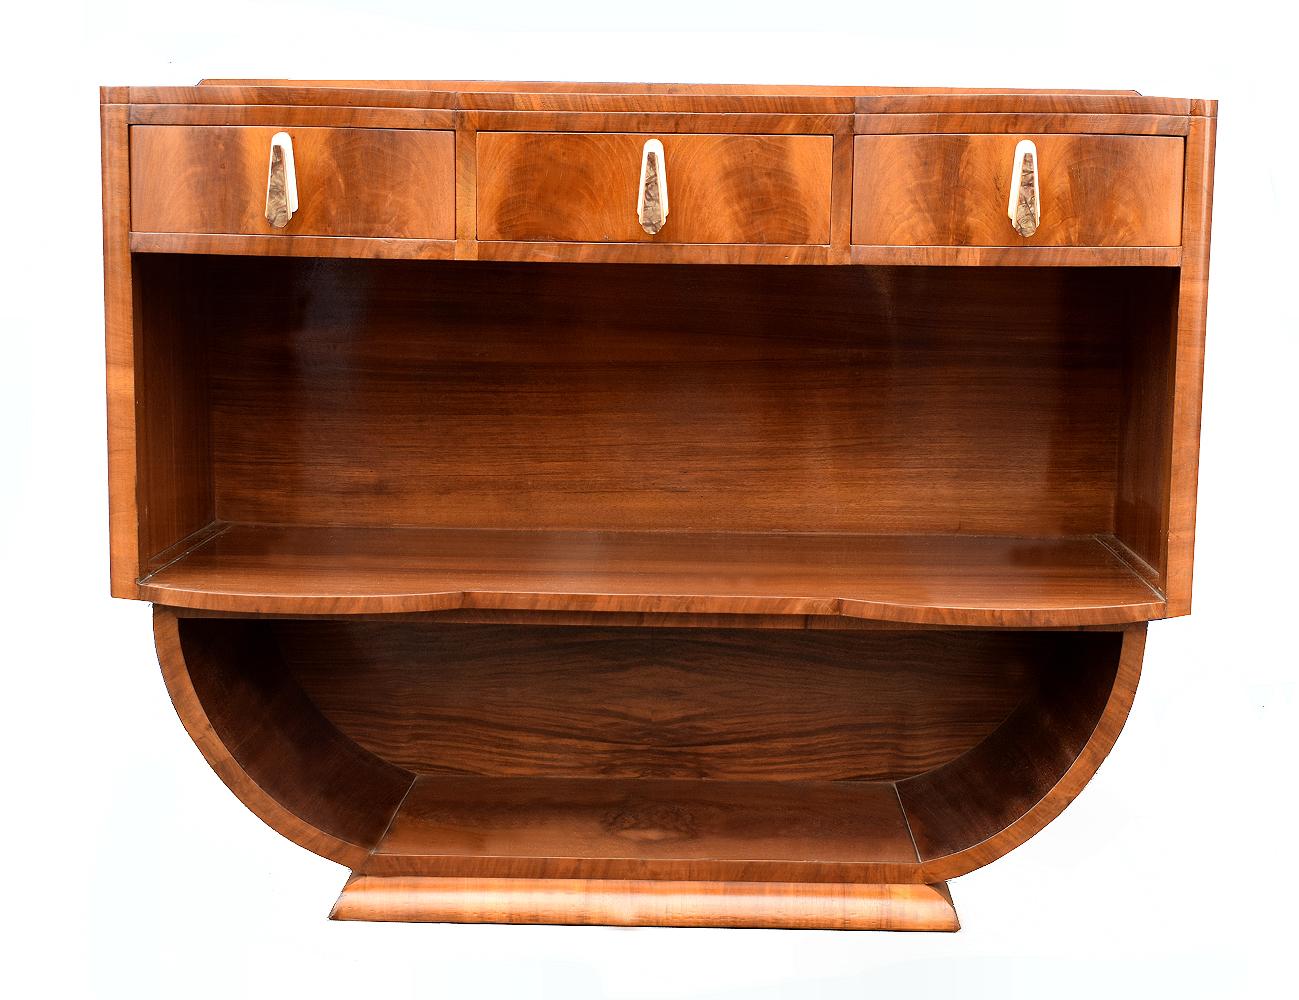 Very stylish and original 1930s Art Deco open sideboard that originates from the UK. An Iconic Art Deco shape which not only looks impressive but is functional too providing great storage and display. Wonderfully figured walnut veneered top which